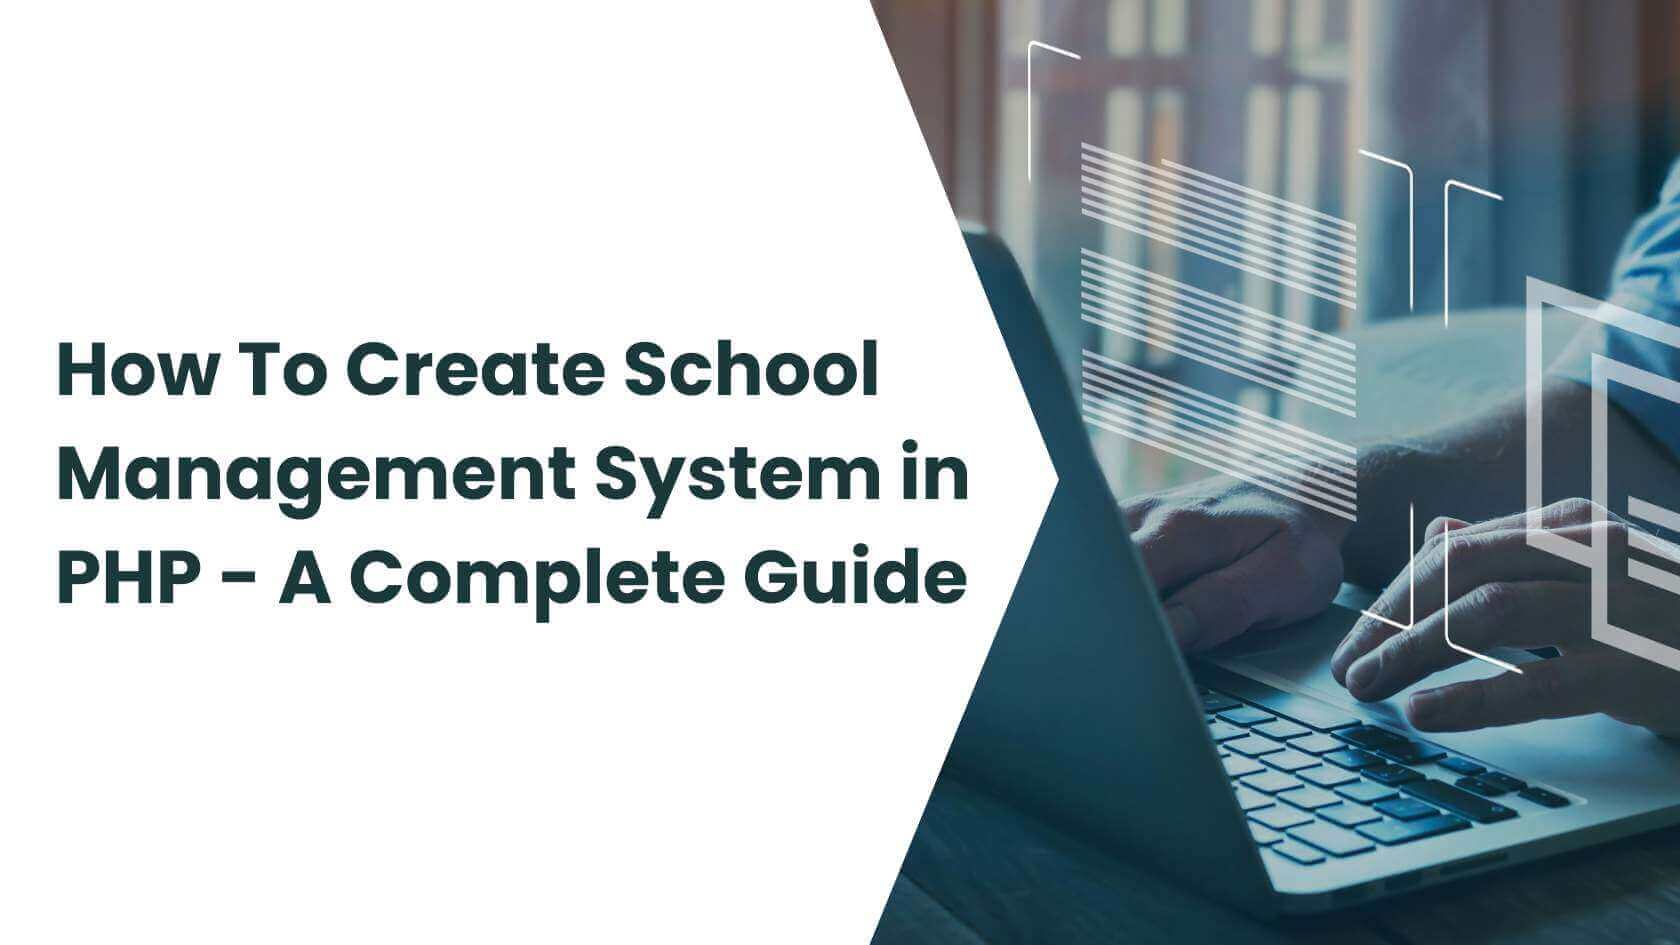 How To Create School Management System in PHP - A Complete Guide